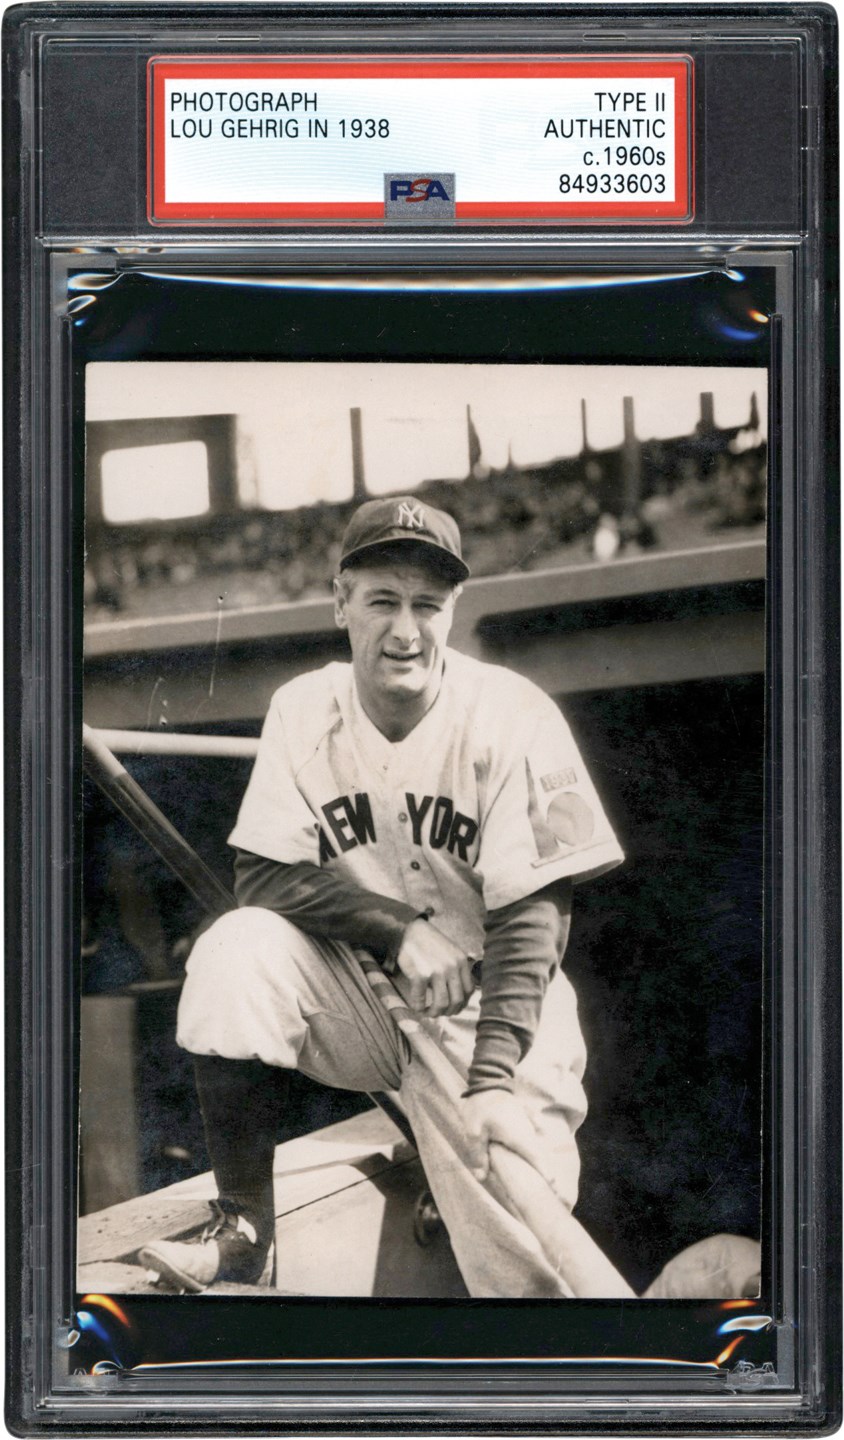 Vintage Sports Photographs - Vintage Photograph Collection w/Ruth & Gehrig (51)